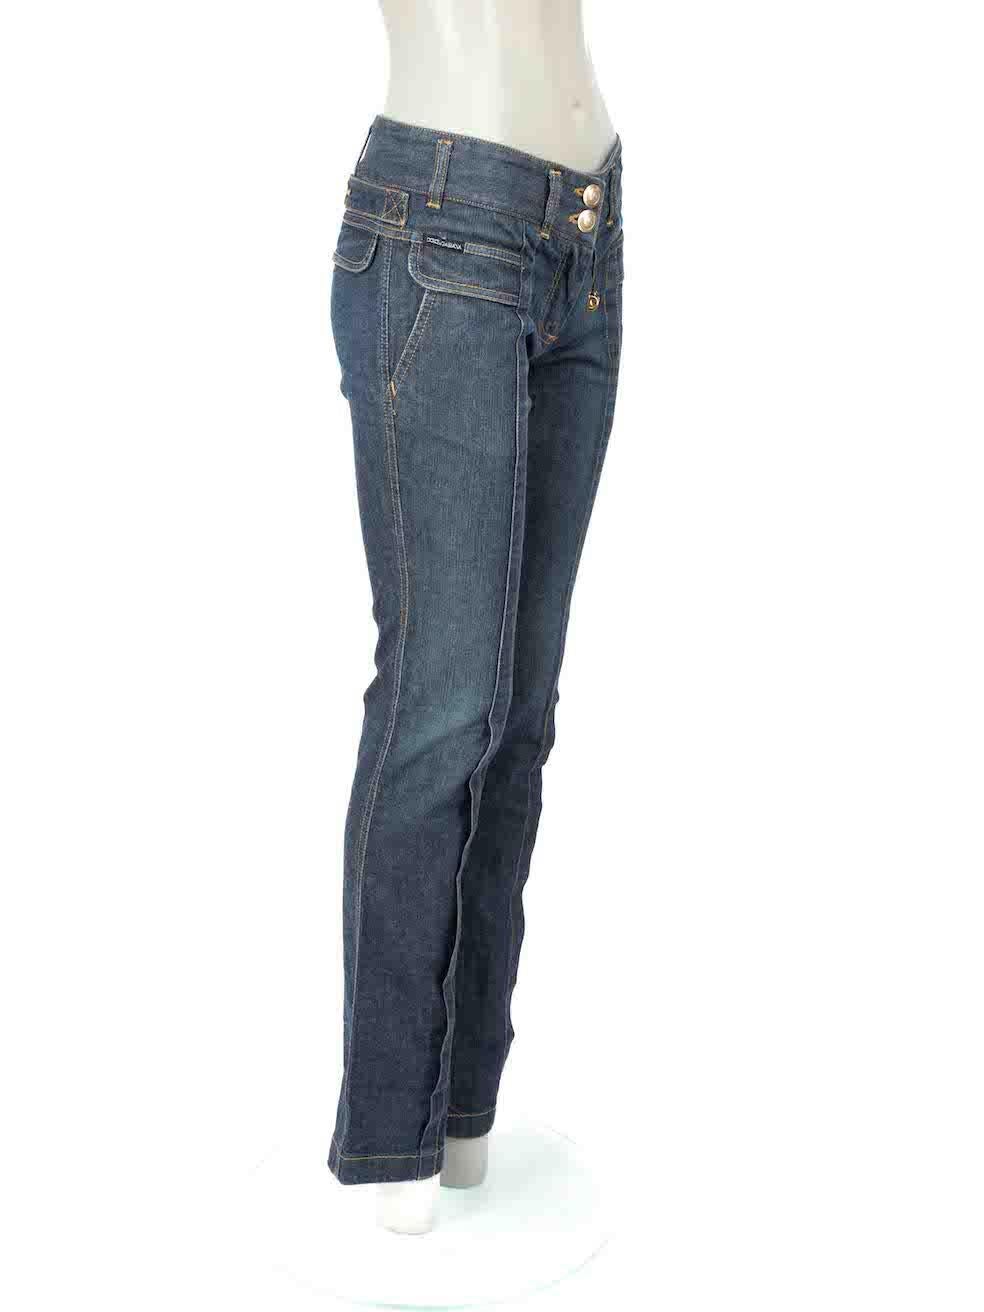 CONDITION is Very good. Minimal wear to jeans is evident. Minimal discolouration to waistband of jeans and to button hardware on this used Dolce & Gabbana designer resale item.

Details
Blue
Cotton
Jeans
Skinny fit
Mid rise
2x Front pockets
Fly zip